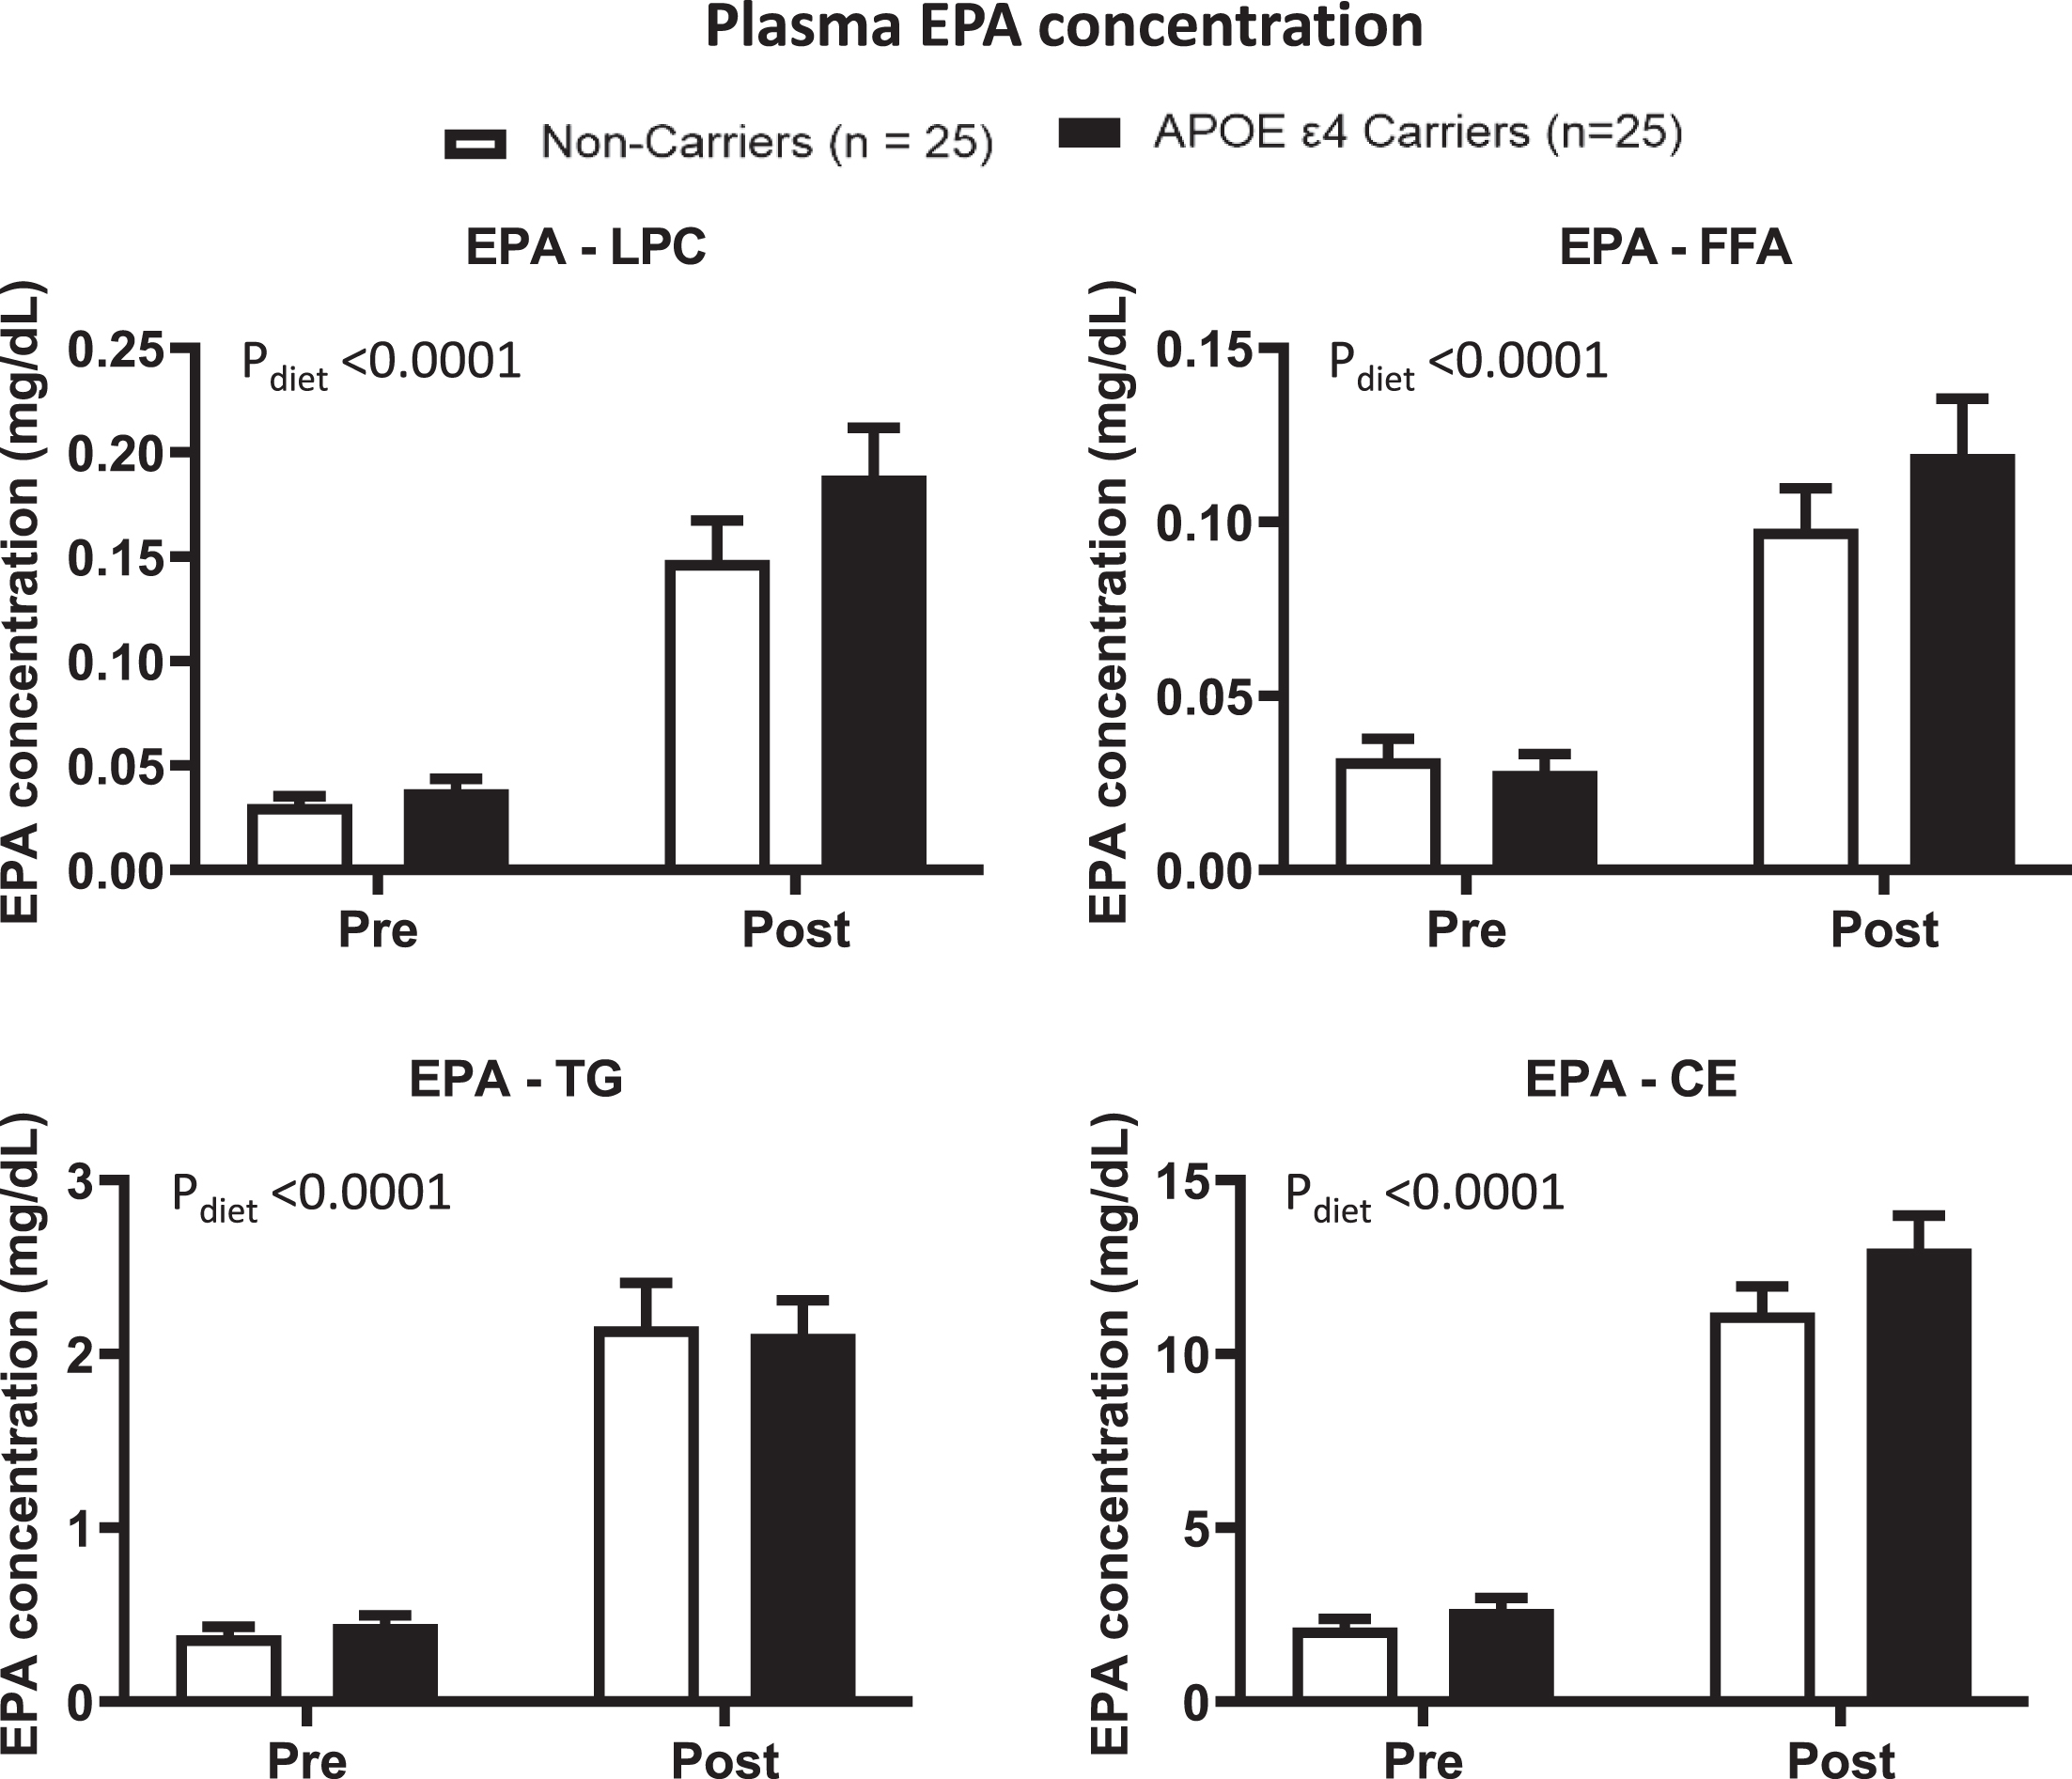 In APOE4 carriers (black) and non-carriers (white), EPA concentrations in different plasma lipid compartments were compared pre- and post-supplementation. LPC: There was a diet effect (p < 0.0001) where the EPA concentration was higher post-supplementation than pre-supplementation. FFA: There was a diet effect (p < 0.0001) where the EPA concentration was higher post-supplementation than pre-supplementation. TG: There was a diet effect (p < 0.0001) where the EPA concentration was higher post-supplementation than pre-supplementation. CE: There was a diet effect (p < 0.0001) where the EPA concentration was higher post-supplementation than pre-supplementation. There was no genotype effect or genotype by diet supplementation in these lipid compartments. Data are presented as the mean±SEM. The Mann–Whitney test was used to compare the EPA medians between APOE4 carriers and non-carriers. The Wilcoxon test was used to compare the EPA medians pre- and post-supplementation. APOE4 –Epsilon 4 allele of the apolipoprotein E gene; CE –Cholesteryl ester; EPA –Eicosapentaenoic acid; FFA –Free fatty acid; LPC –Lysophosphatidylcholine; TG –Triglyceride.